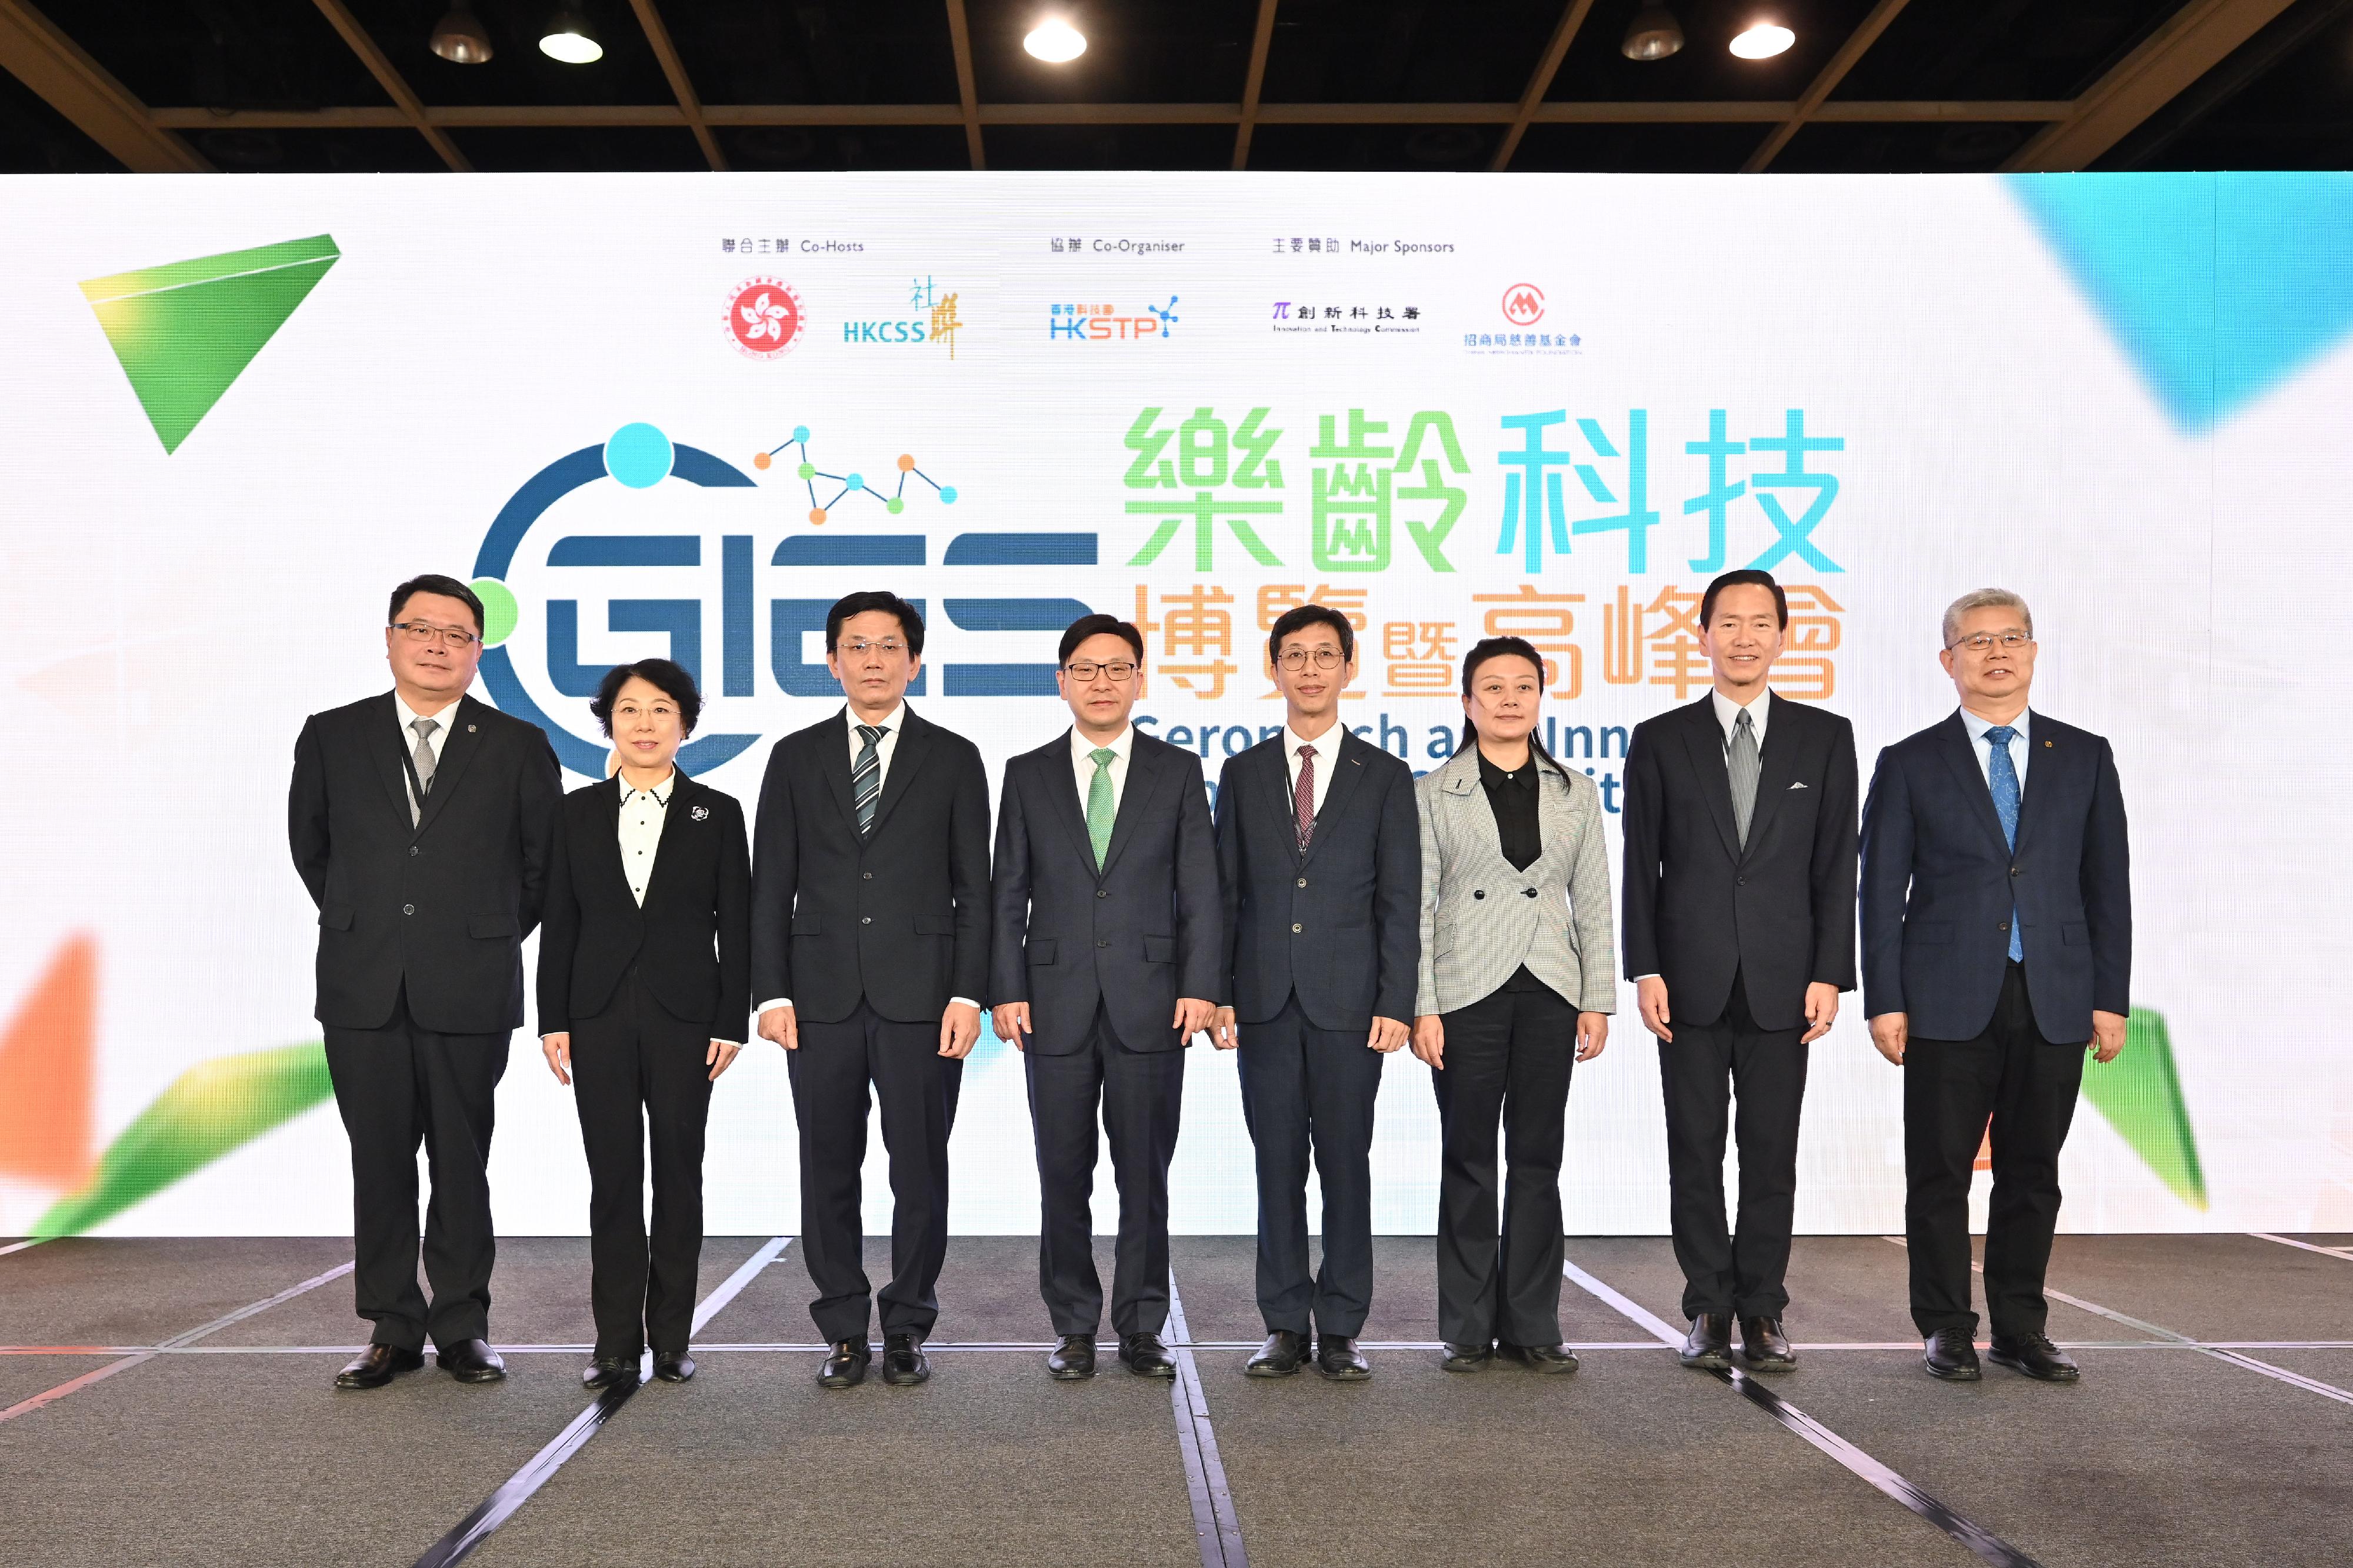 The Secretary for Labour and Welfare, Mr Chris Sun, today (November 23) officiated at the opening ceremony of the Gerontech and Innovation Expo cum Summit 2023 co-hosted by the Government and the Hong Kong Council of Social Service. Photo shows (from left) the Chairman of the Hong Kong Science and Technology Parks Corporation, Dr Sunny Chai; Second-level Inspector of the Guangzhou Municipal Civil Affairs Bureau Ms Yi Lihua; the Deputy Director-General of the Department of Social Affairs of the Liaison Office of the Central People's Government in the Hong Kong Special Administrative Region, Mr Zhou He; Mr Sun; the Director of the Social Welfare Bureau of the Macao Special Administrative Region Government, Mr Hon Wai; the Director-General of the Civil Affairs Bureau of Shenzhen Municipality, Ms Xiong Ying; the Chairperson of the Hong Kong Council of Social Service, Mr Bernard Chan; and the Executive Director of the China Merchants Foundation, Mr Zhang Junli, officiating at the opening ceremony.